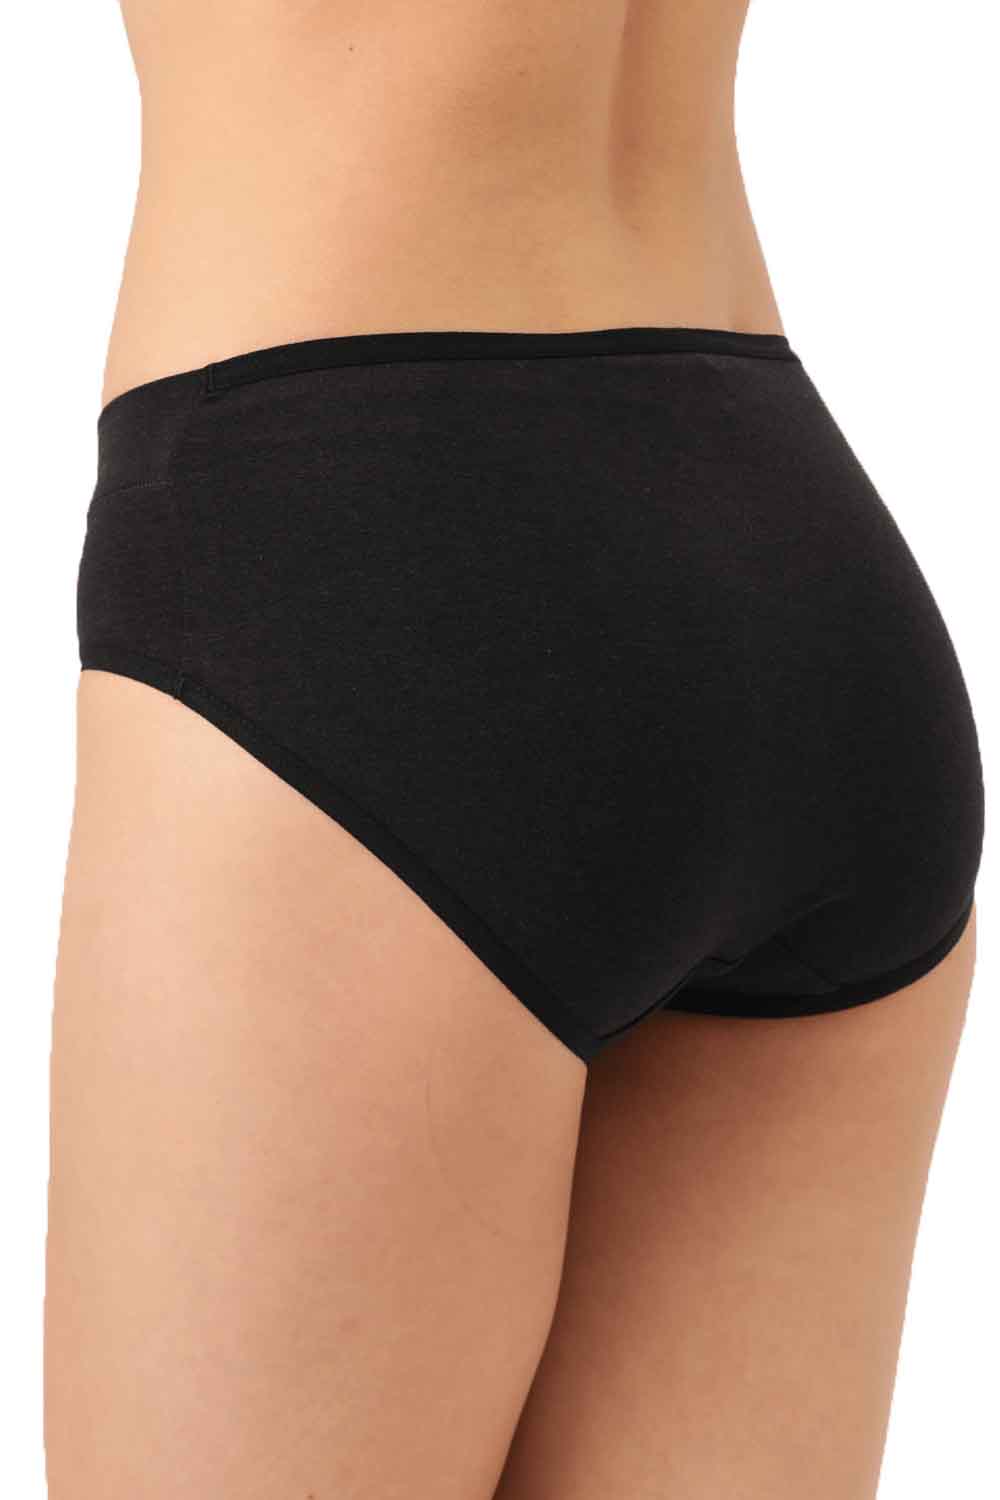 Organic Cotton Antimicrobial Maternity Panty (Pack Of 2)-IMP102-Black_Black-